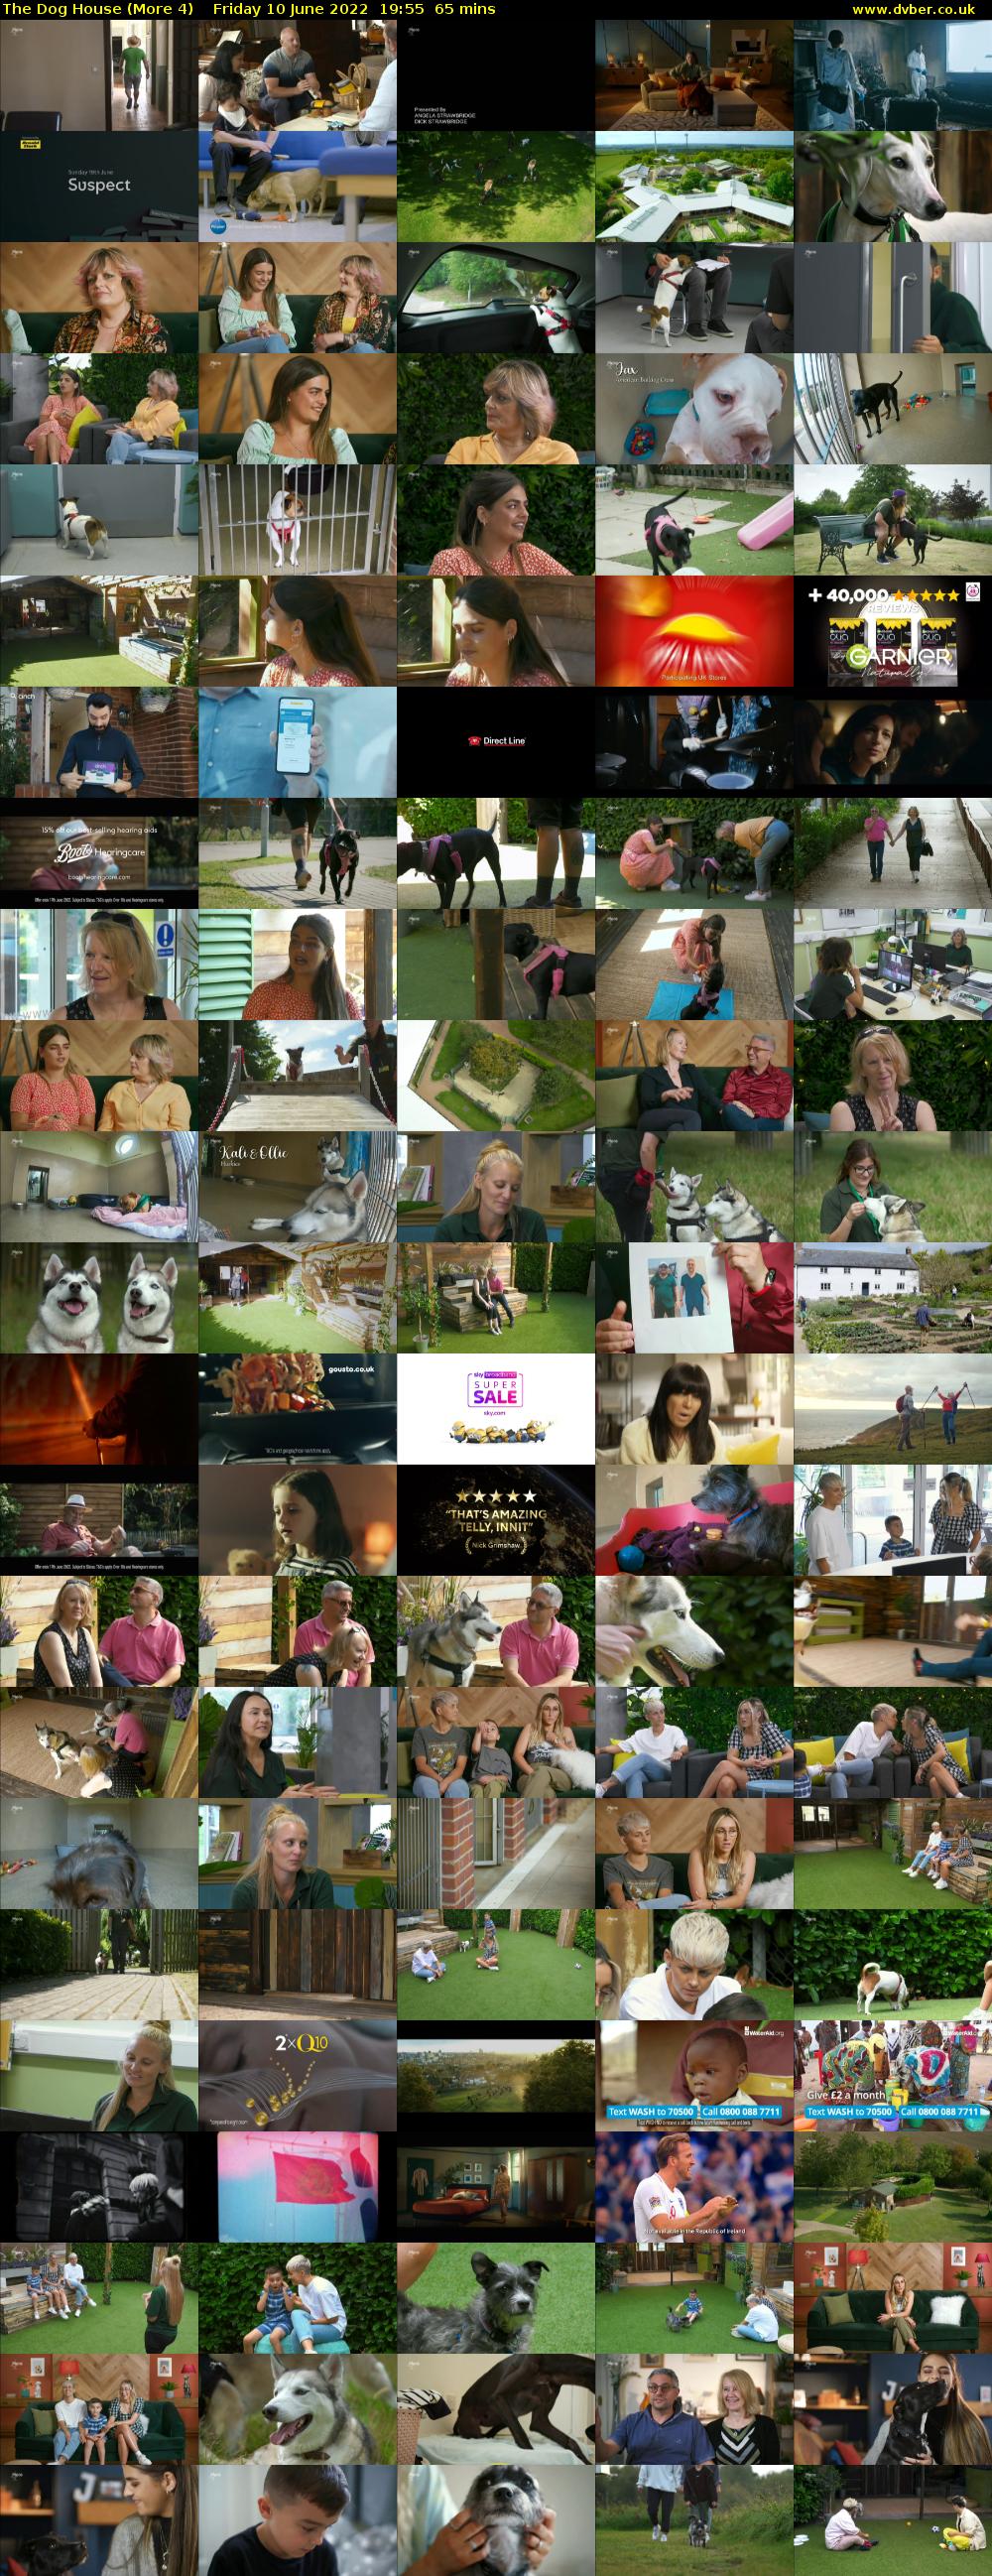 The Dog House (More 4) Friday 10 June 2022 19:55 - 21:00